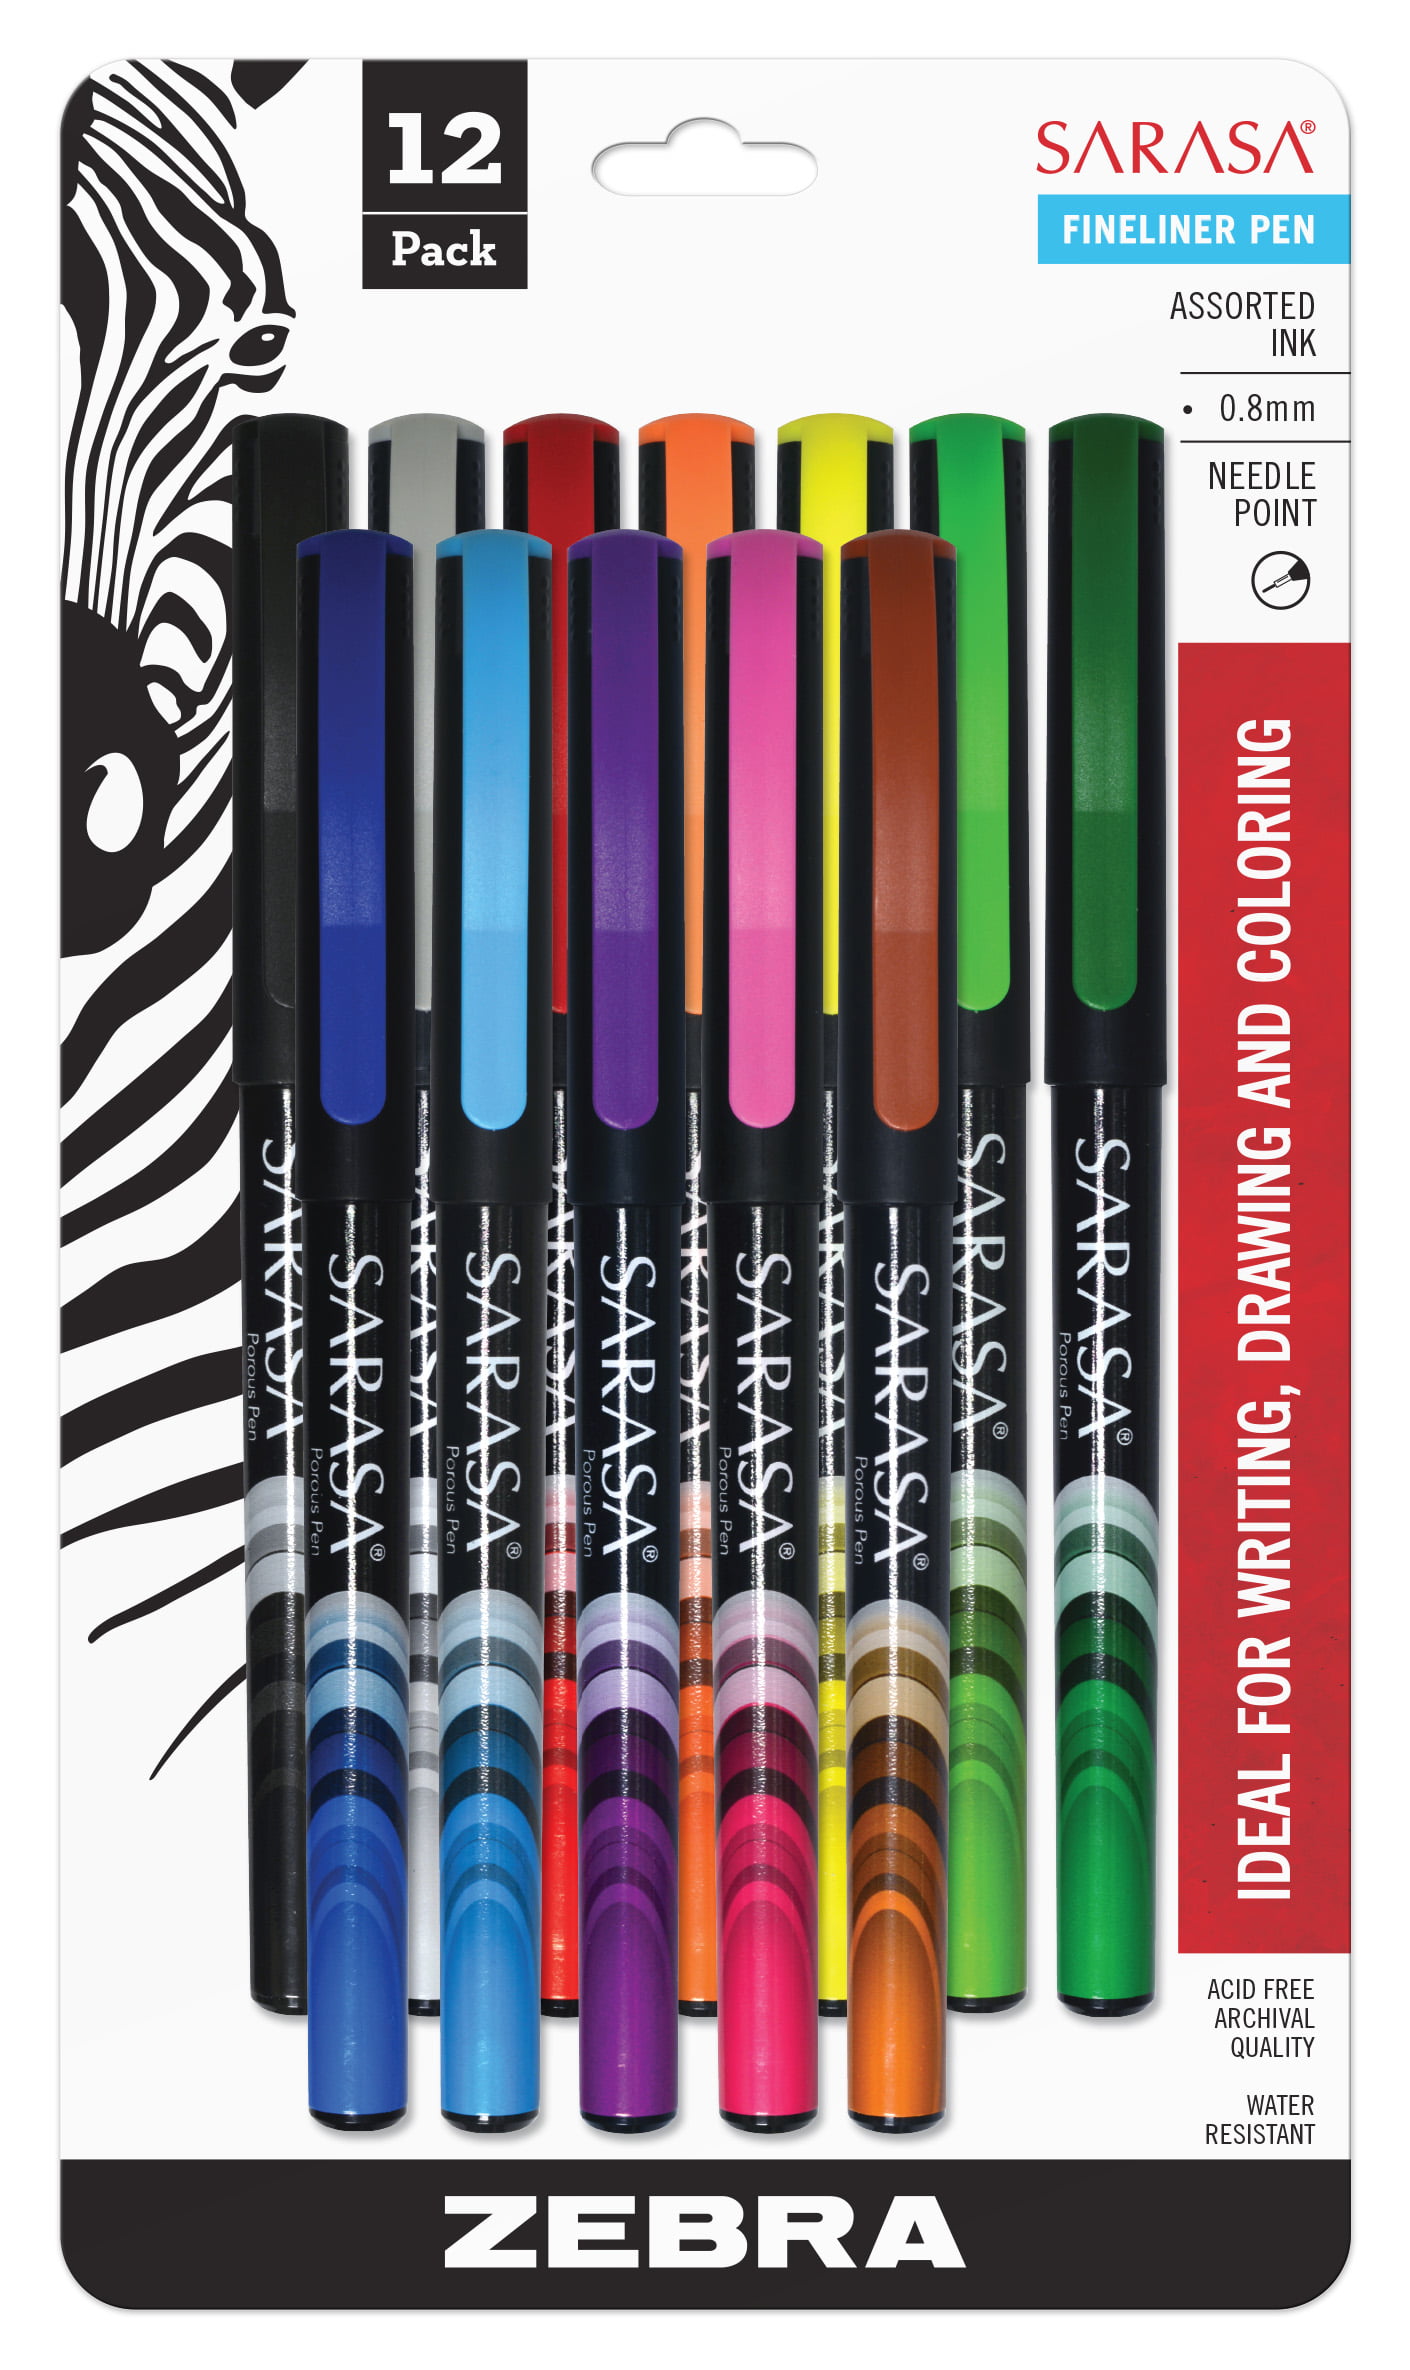 Nylea Fineliner Color Pen Set, Needle Point 0.4mm Assorted Color